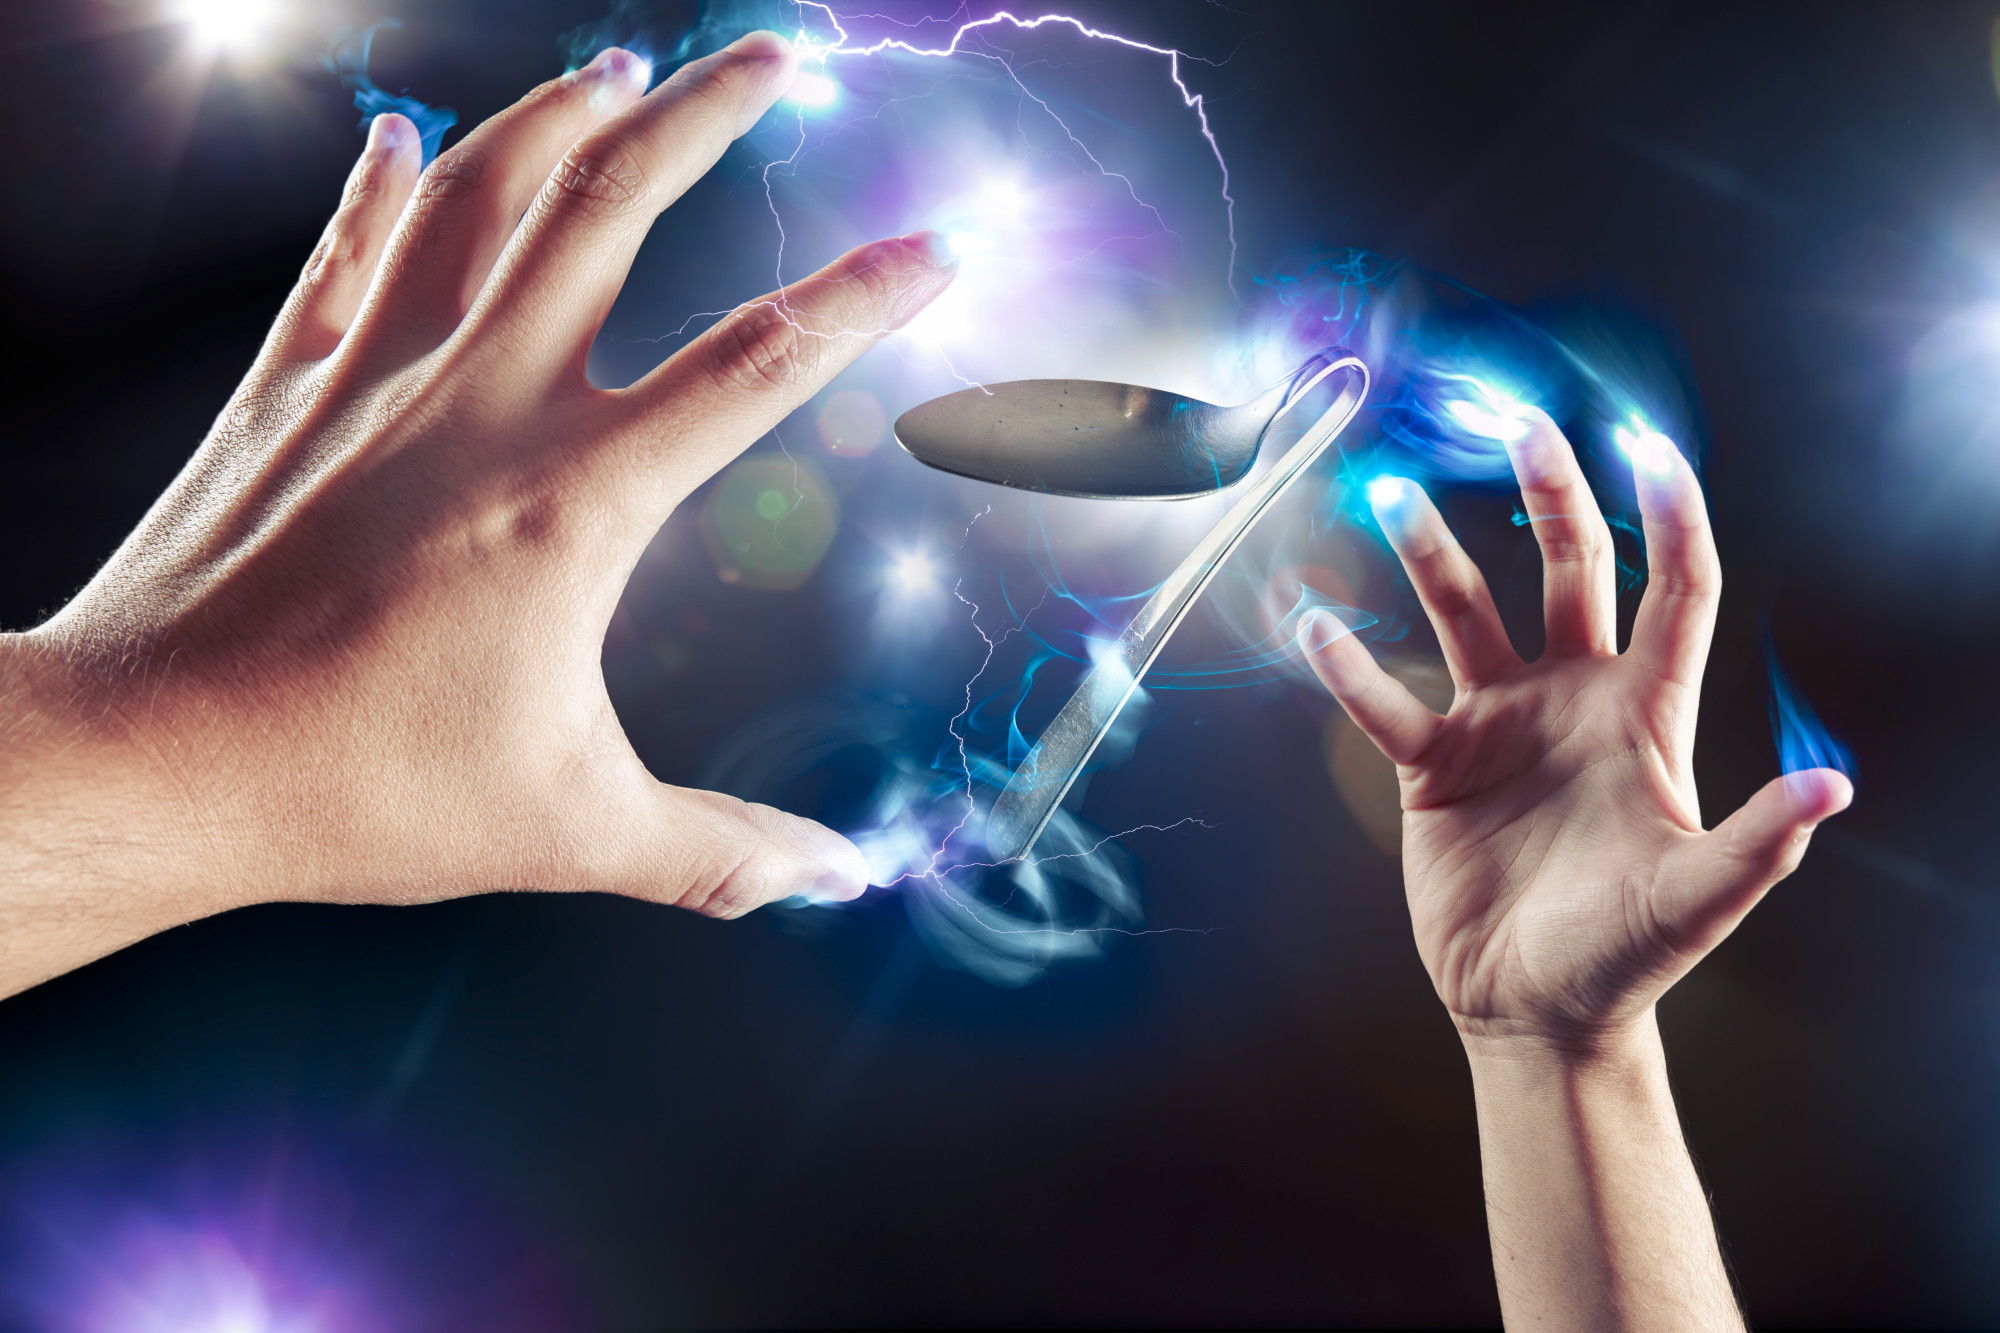 psychic powers unlock psychics knowing truth